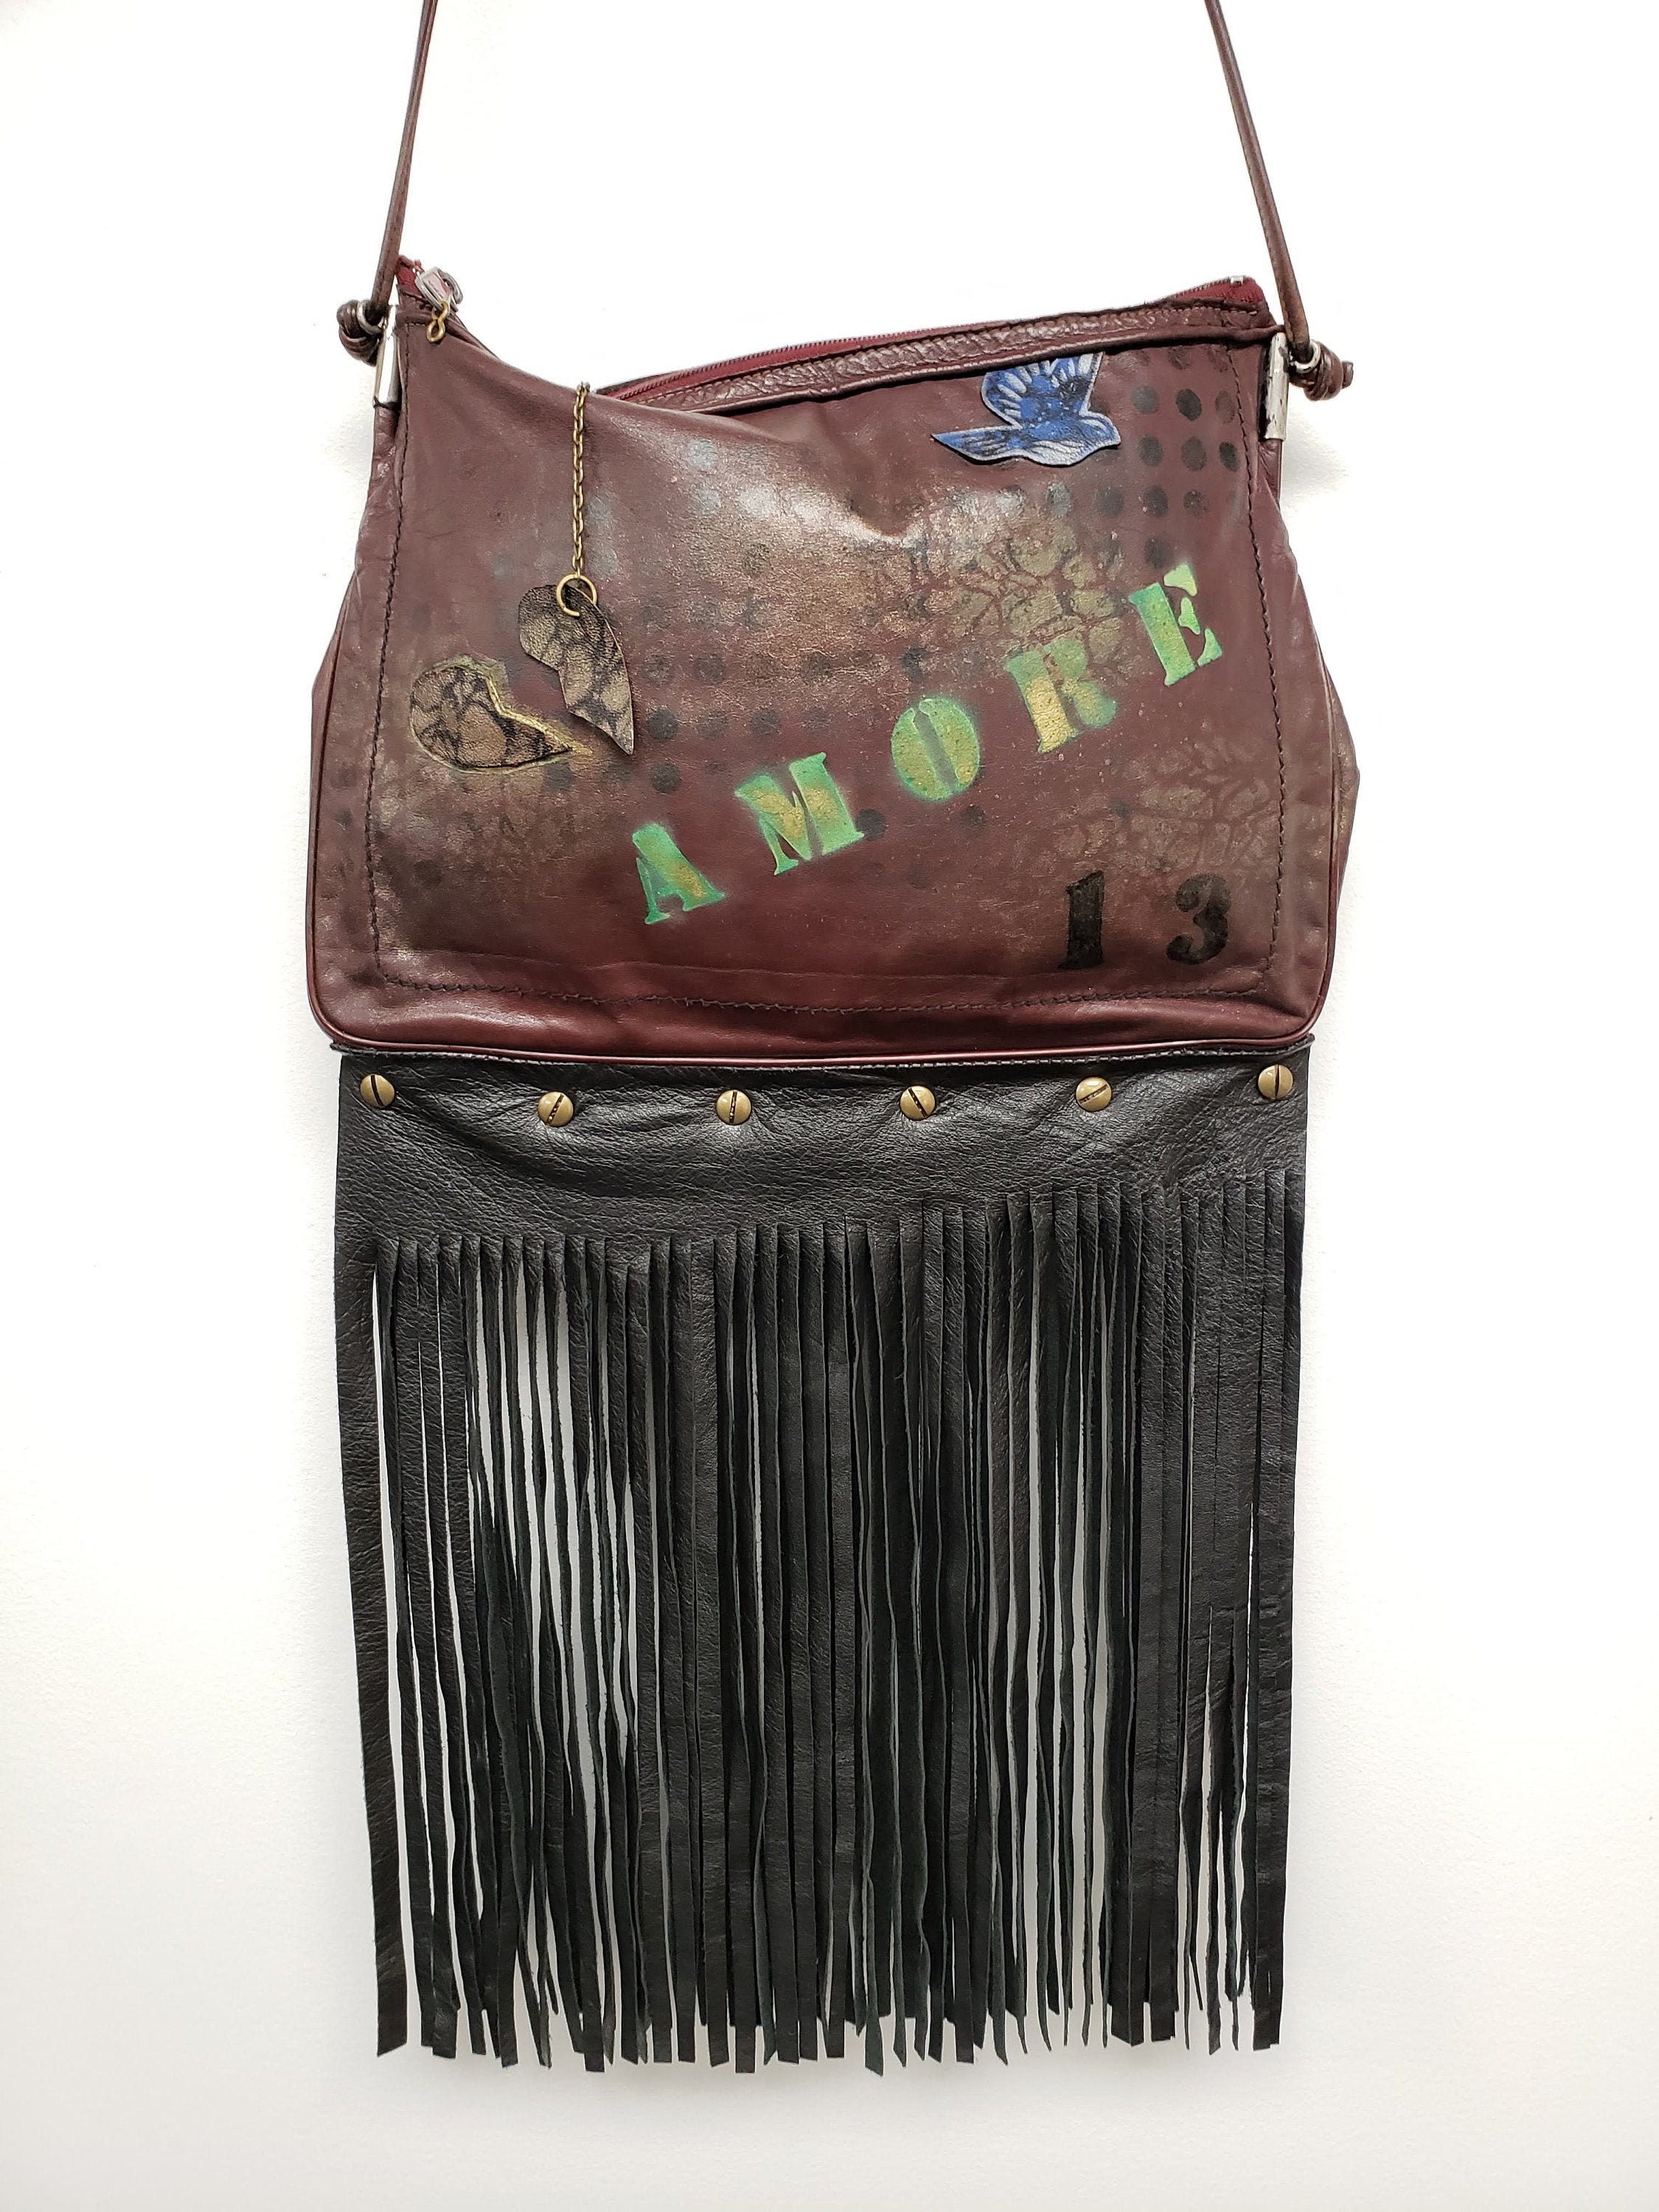 Vintage Louis Vuitton Upcycled Messinger Bag with Fringe for Sale